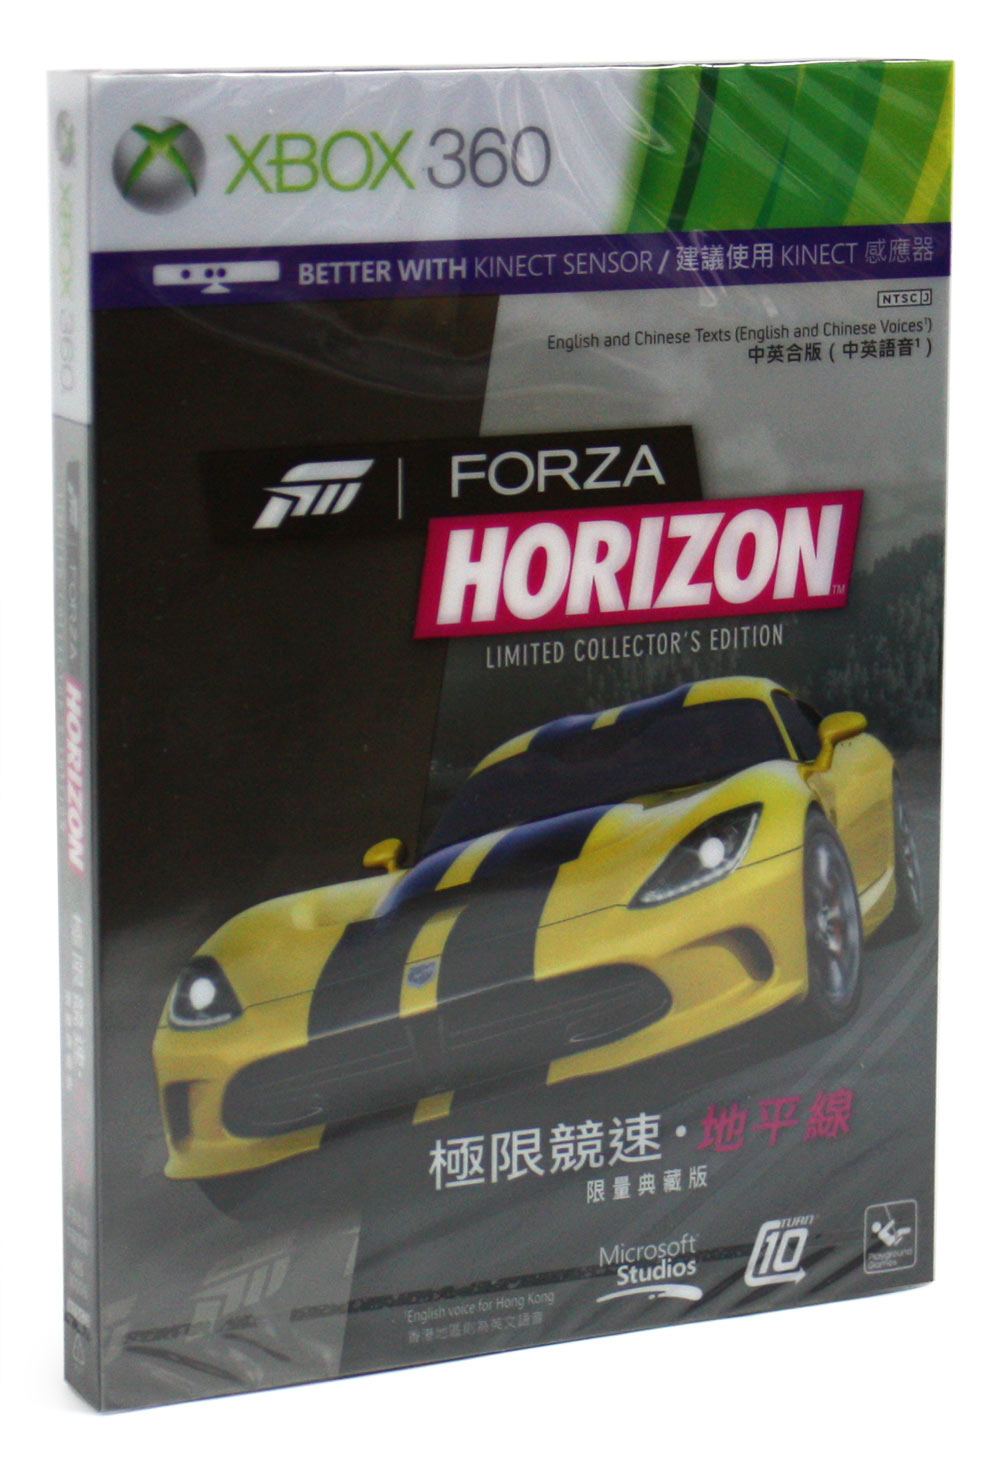 Forza Horizon Limited Collector's Edition Xbox 360 Japan Ver.